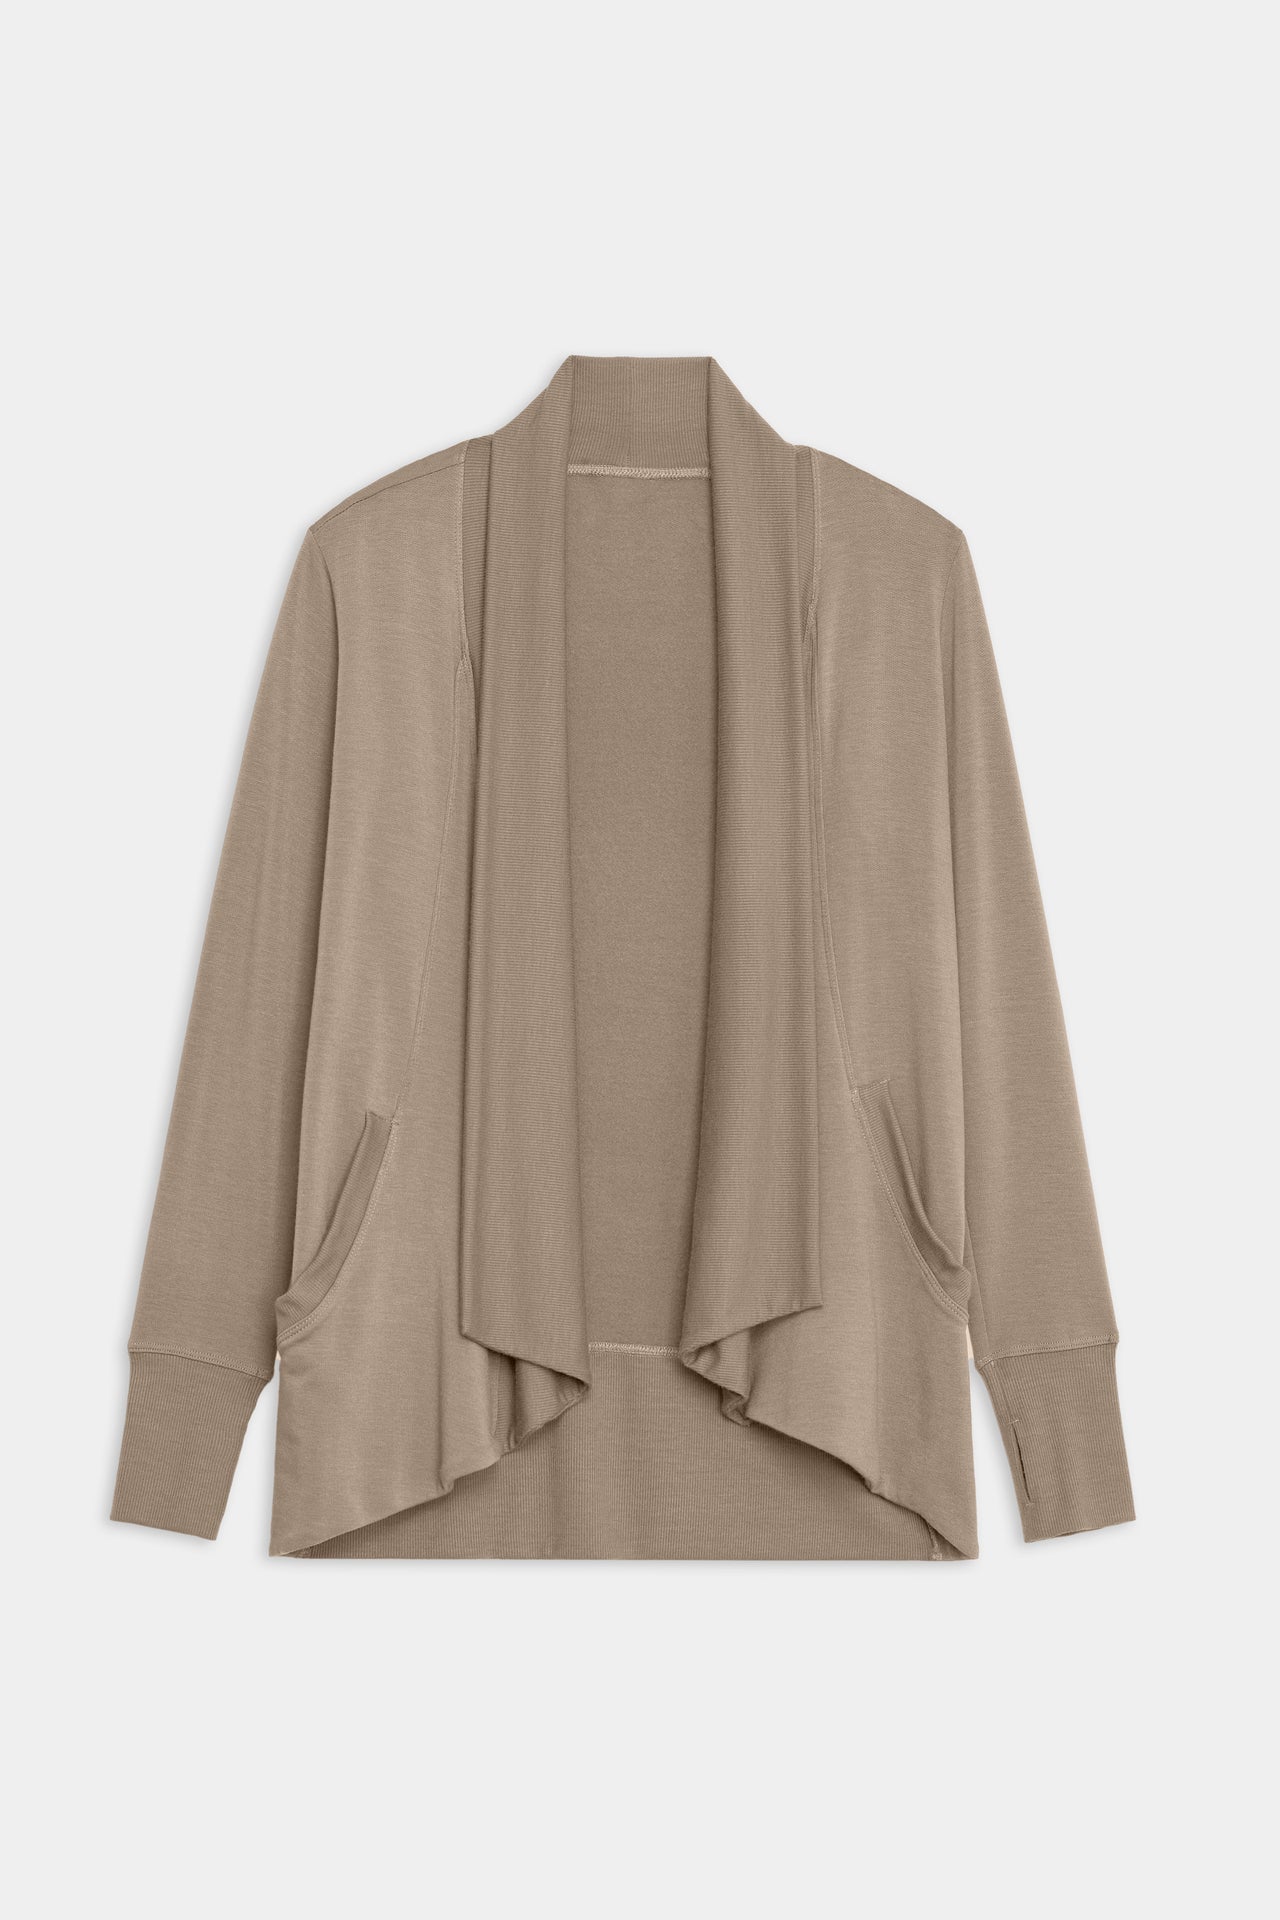 Flat view of light brown long sleeve open front flowy sweater with thumb holes on the sleeve cuff 